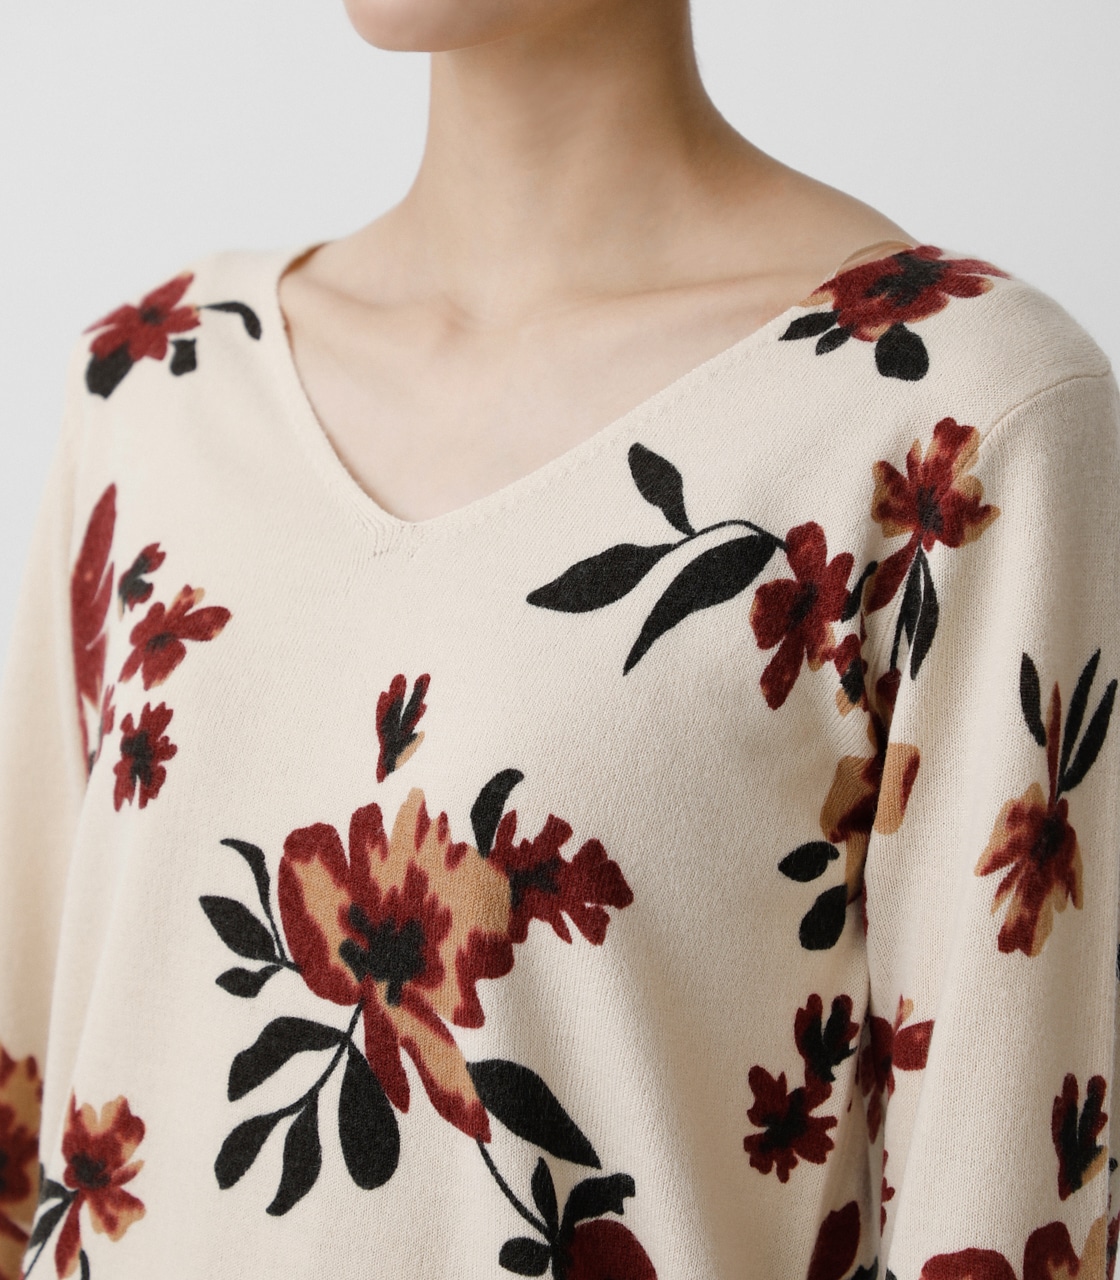 NUDIE 2WAY FLOWER KNIT TOPS/ヌーディー2WAYフラワーニットトップス 詳細画像 柄RED 8